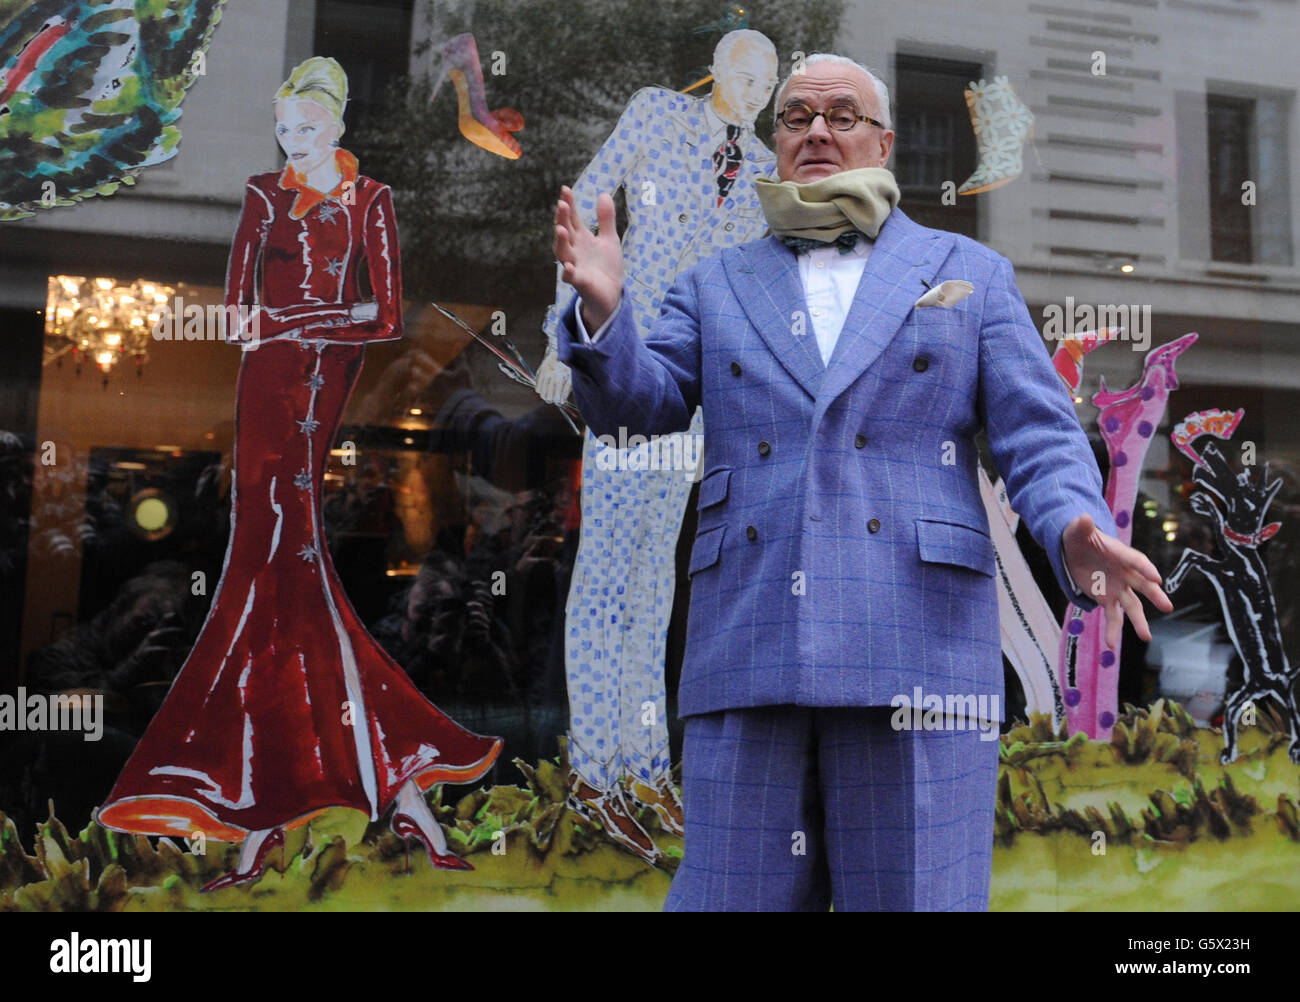 Spanish footwear designer Manolo Blahnik, unveils the windows display designed by him for London Fashion Week at The Mayfair Hotel, London, the official hotel to London Fashion Week. Stock Photo